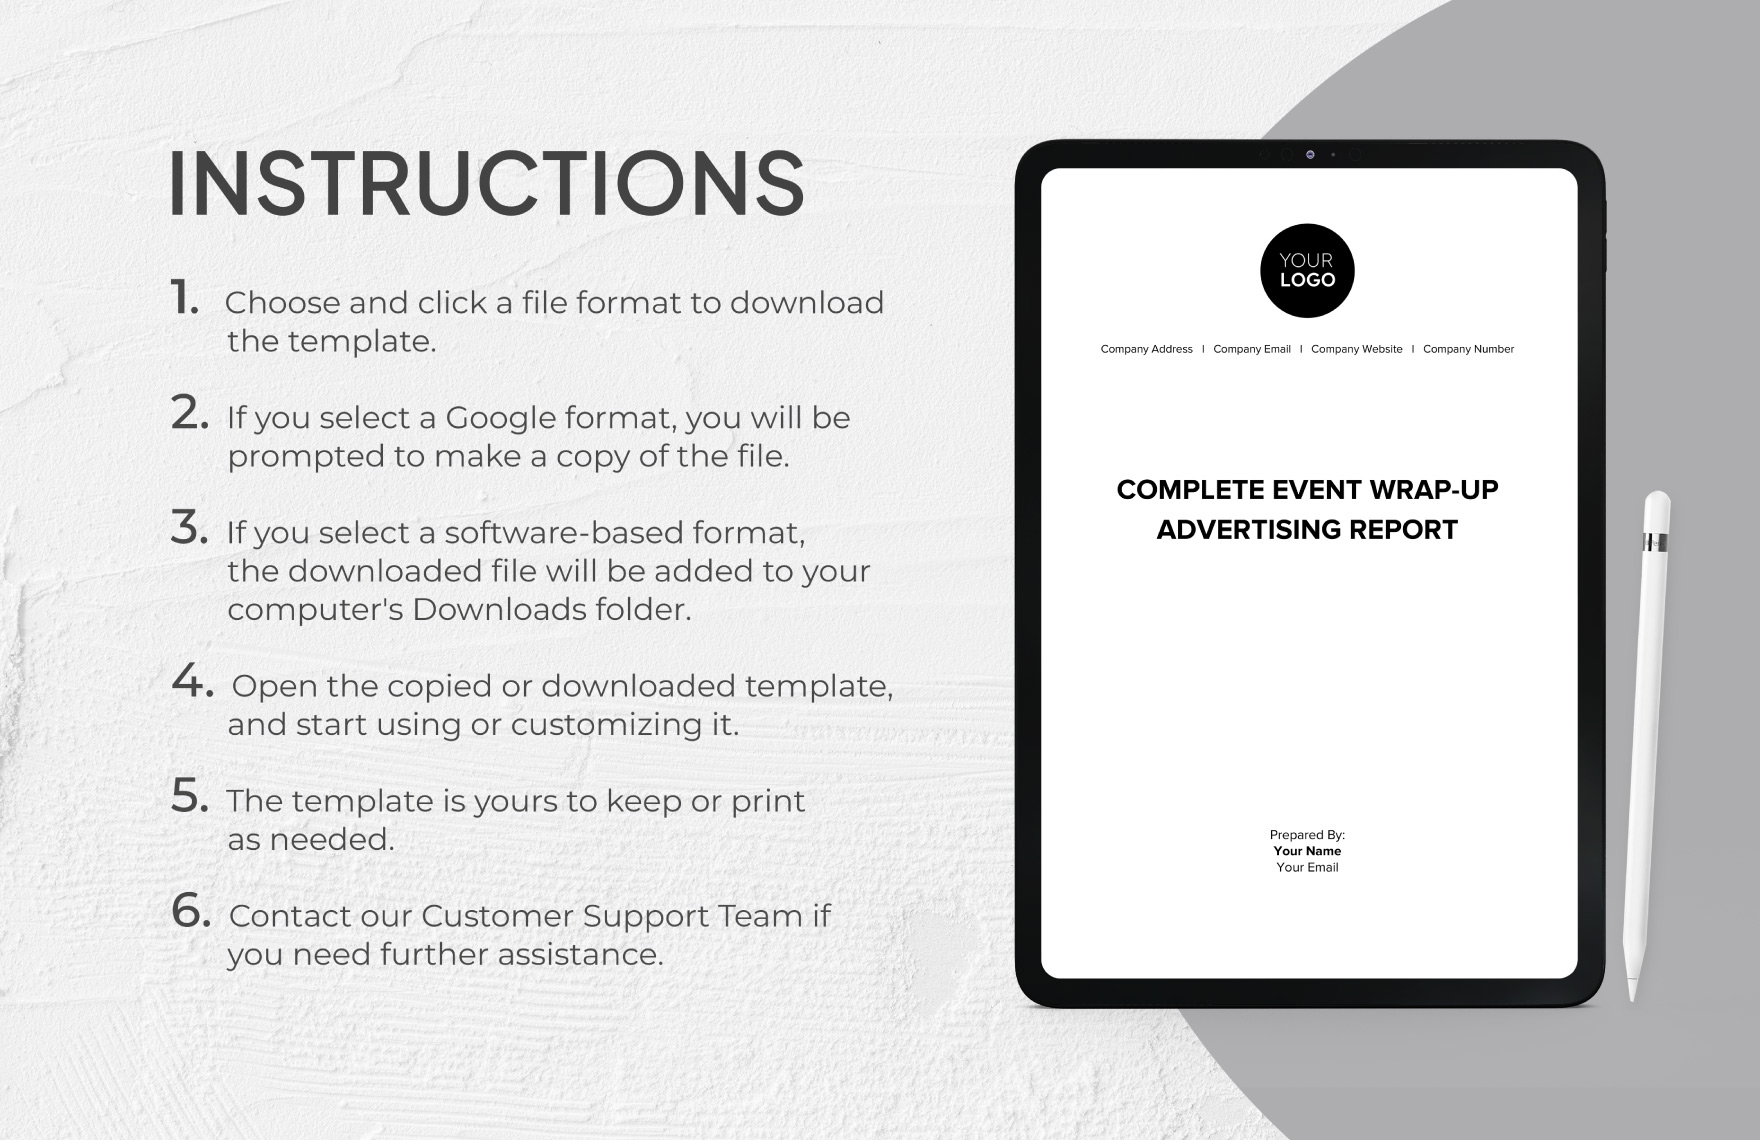 Complete Event Wrap-Up Advertising Report Template